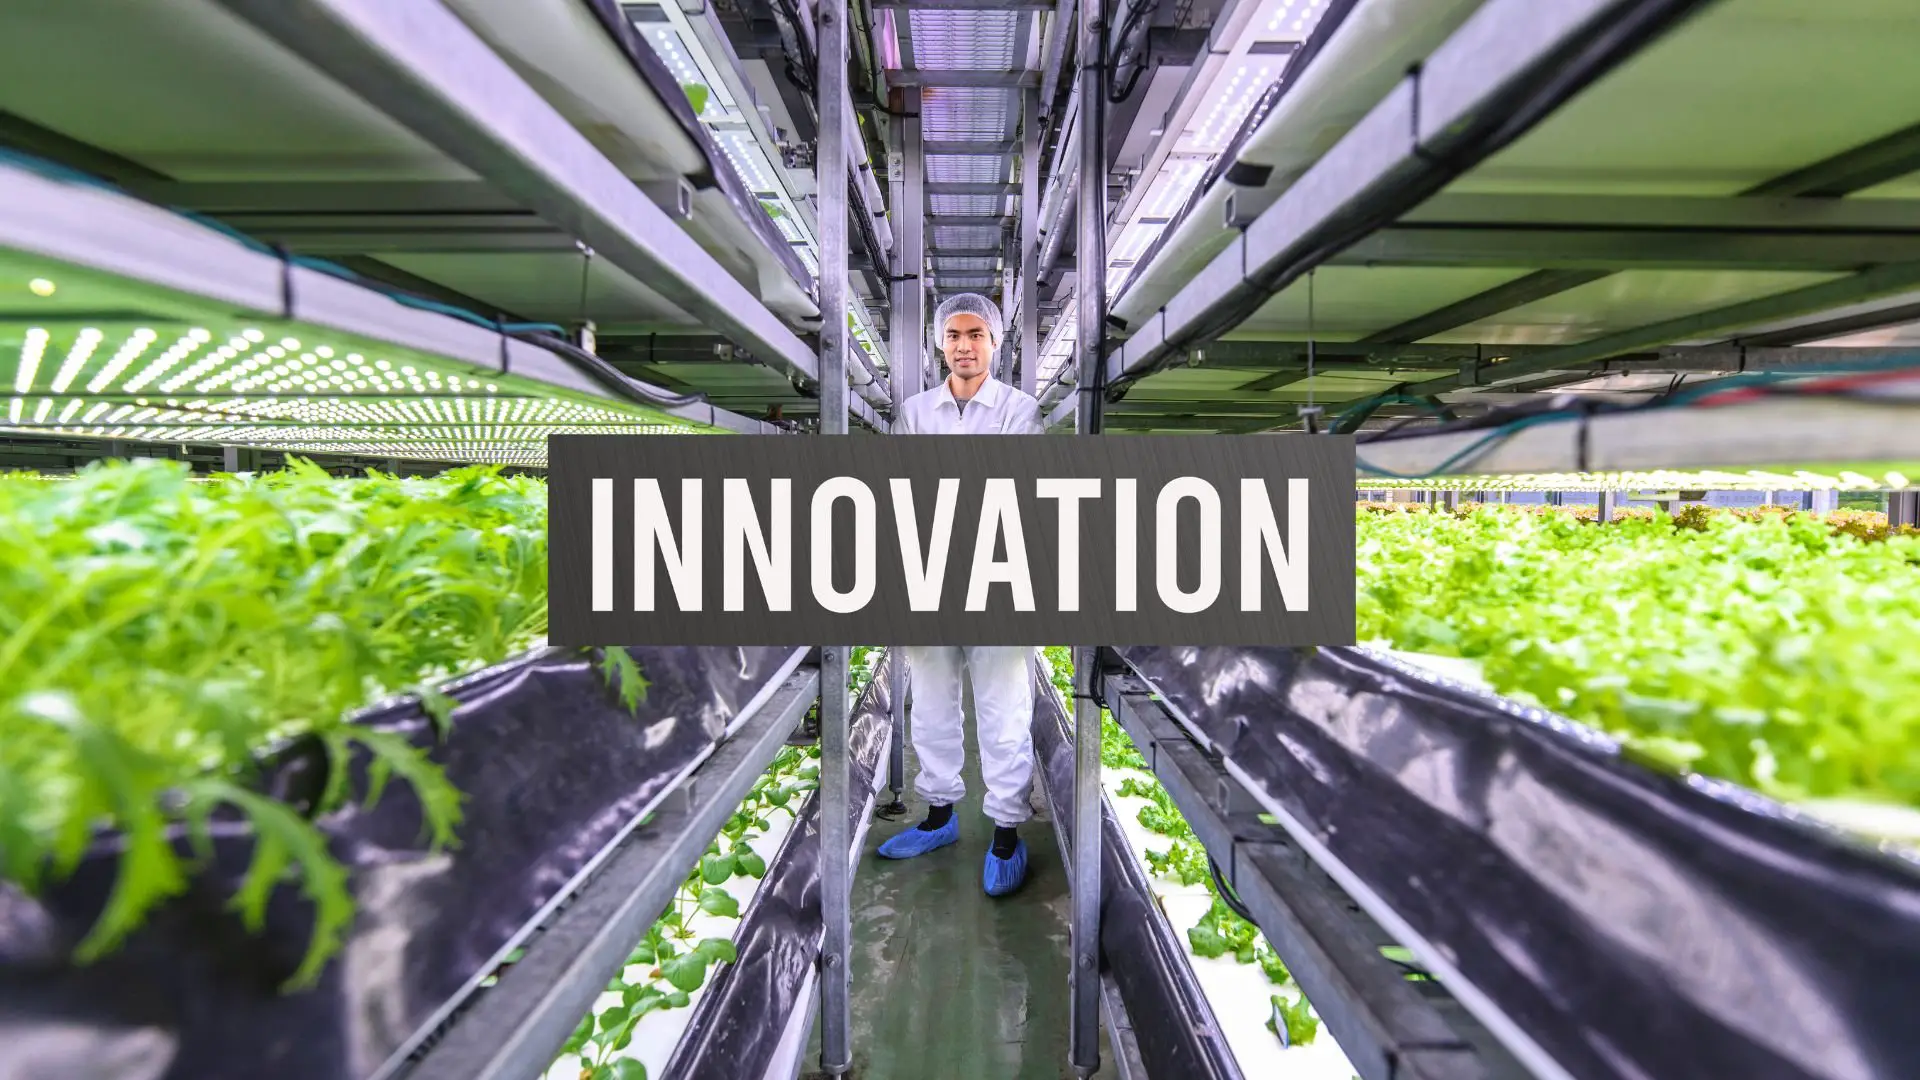 % Discover how modern hydroponic technologies are revolutionizing indoor farming and paving the way for exciting advances in this field.